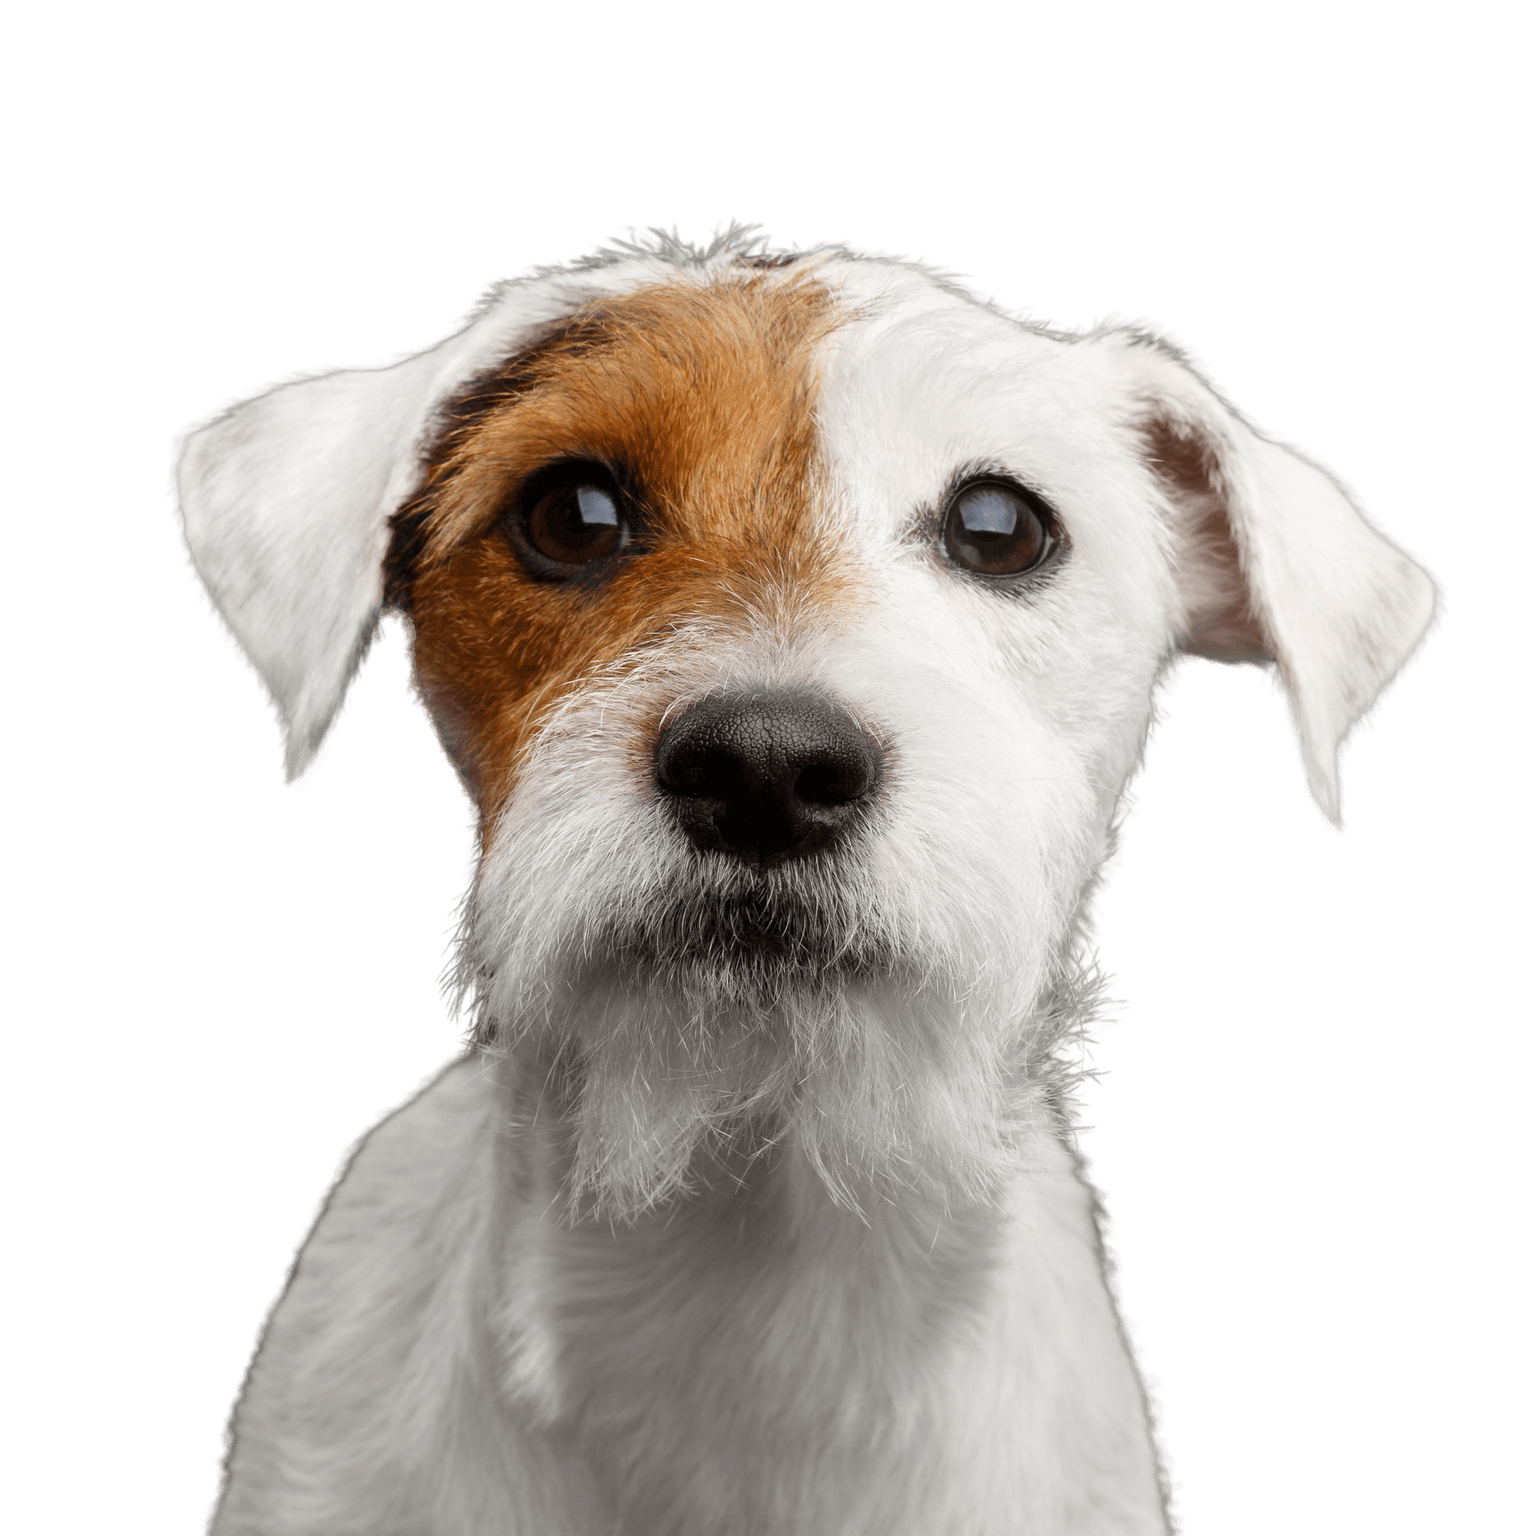 Dog,Mammal,Vertebrate,Dog breed,Canidae,Russell terrier,Companion dog,Carnivore,Parson russell terrier,Puppy,